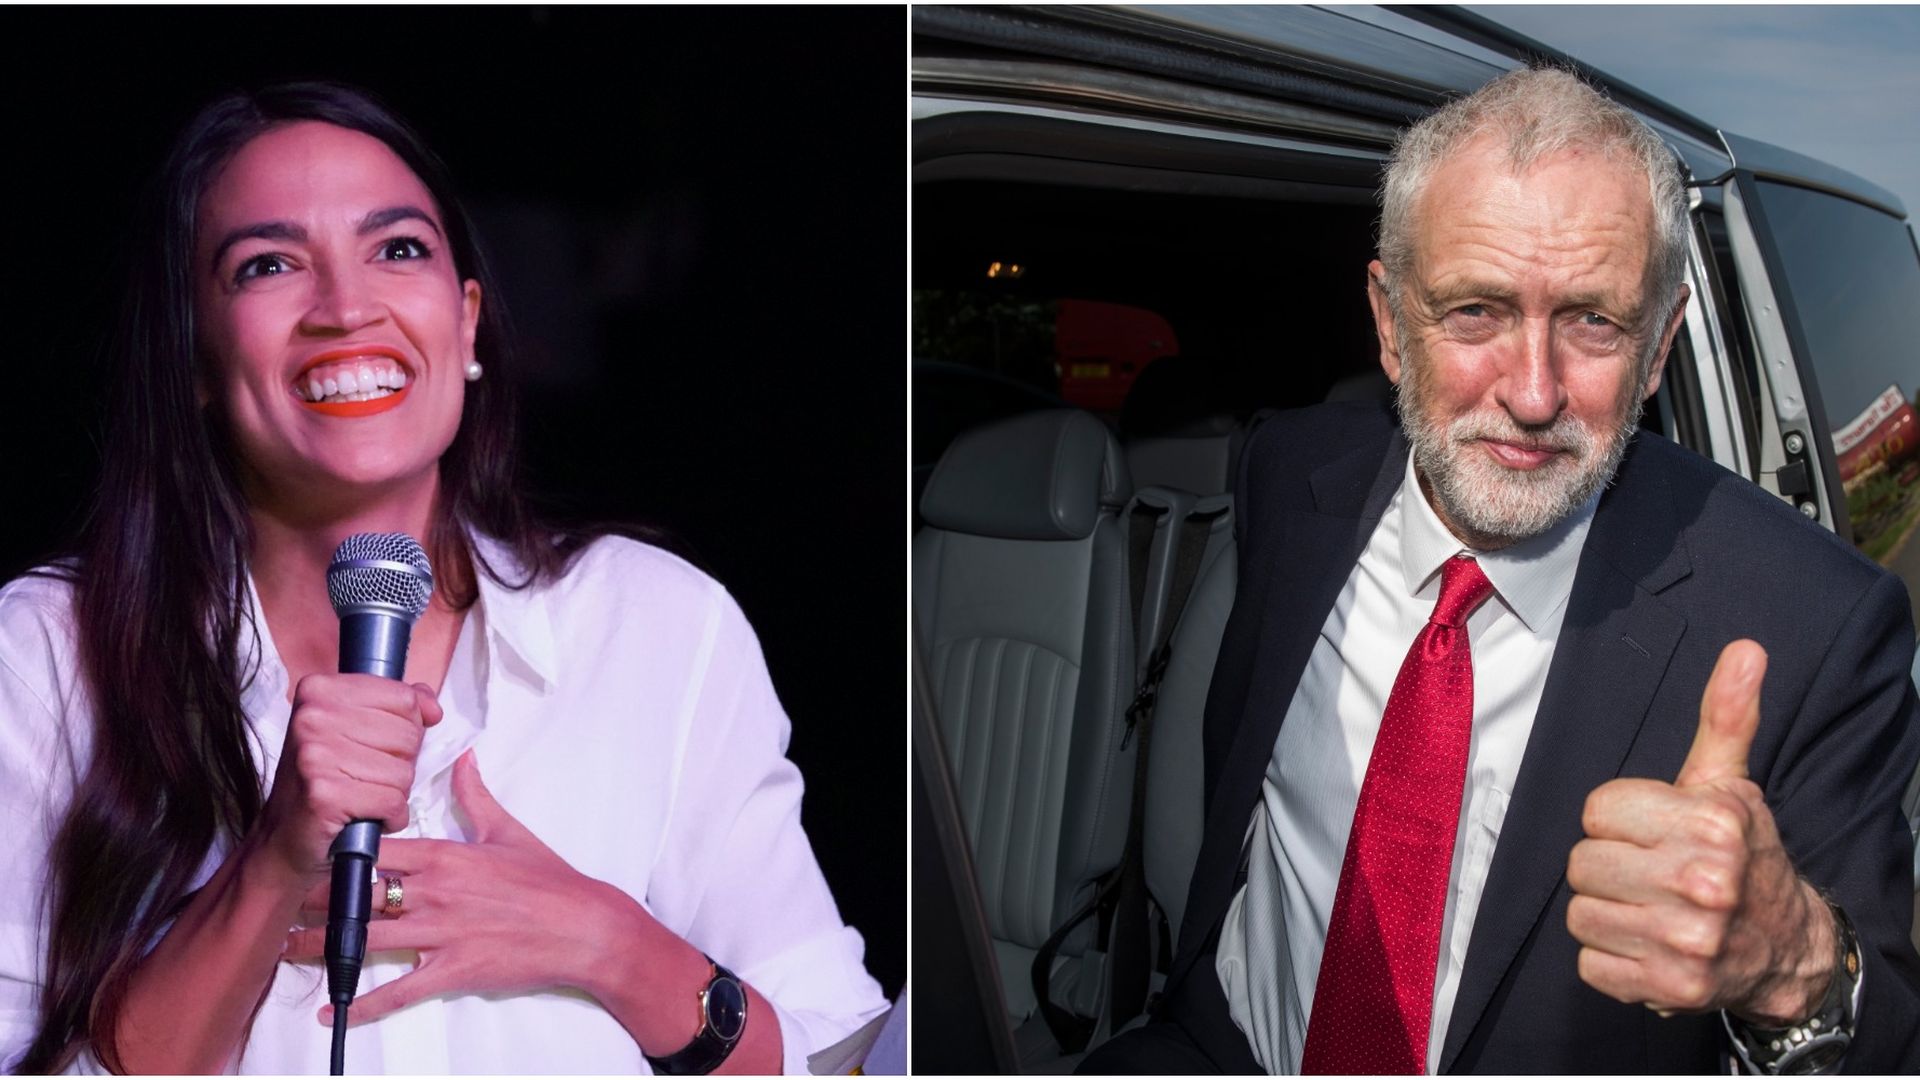 Alexandria Ocasio-Cortez smiling, opposite Jeremy Corbyn who is giving a thumbs up